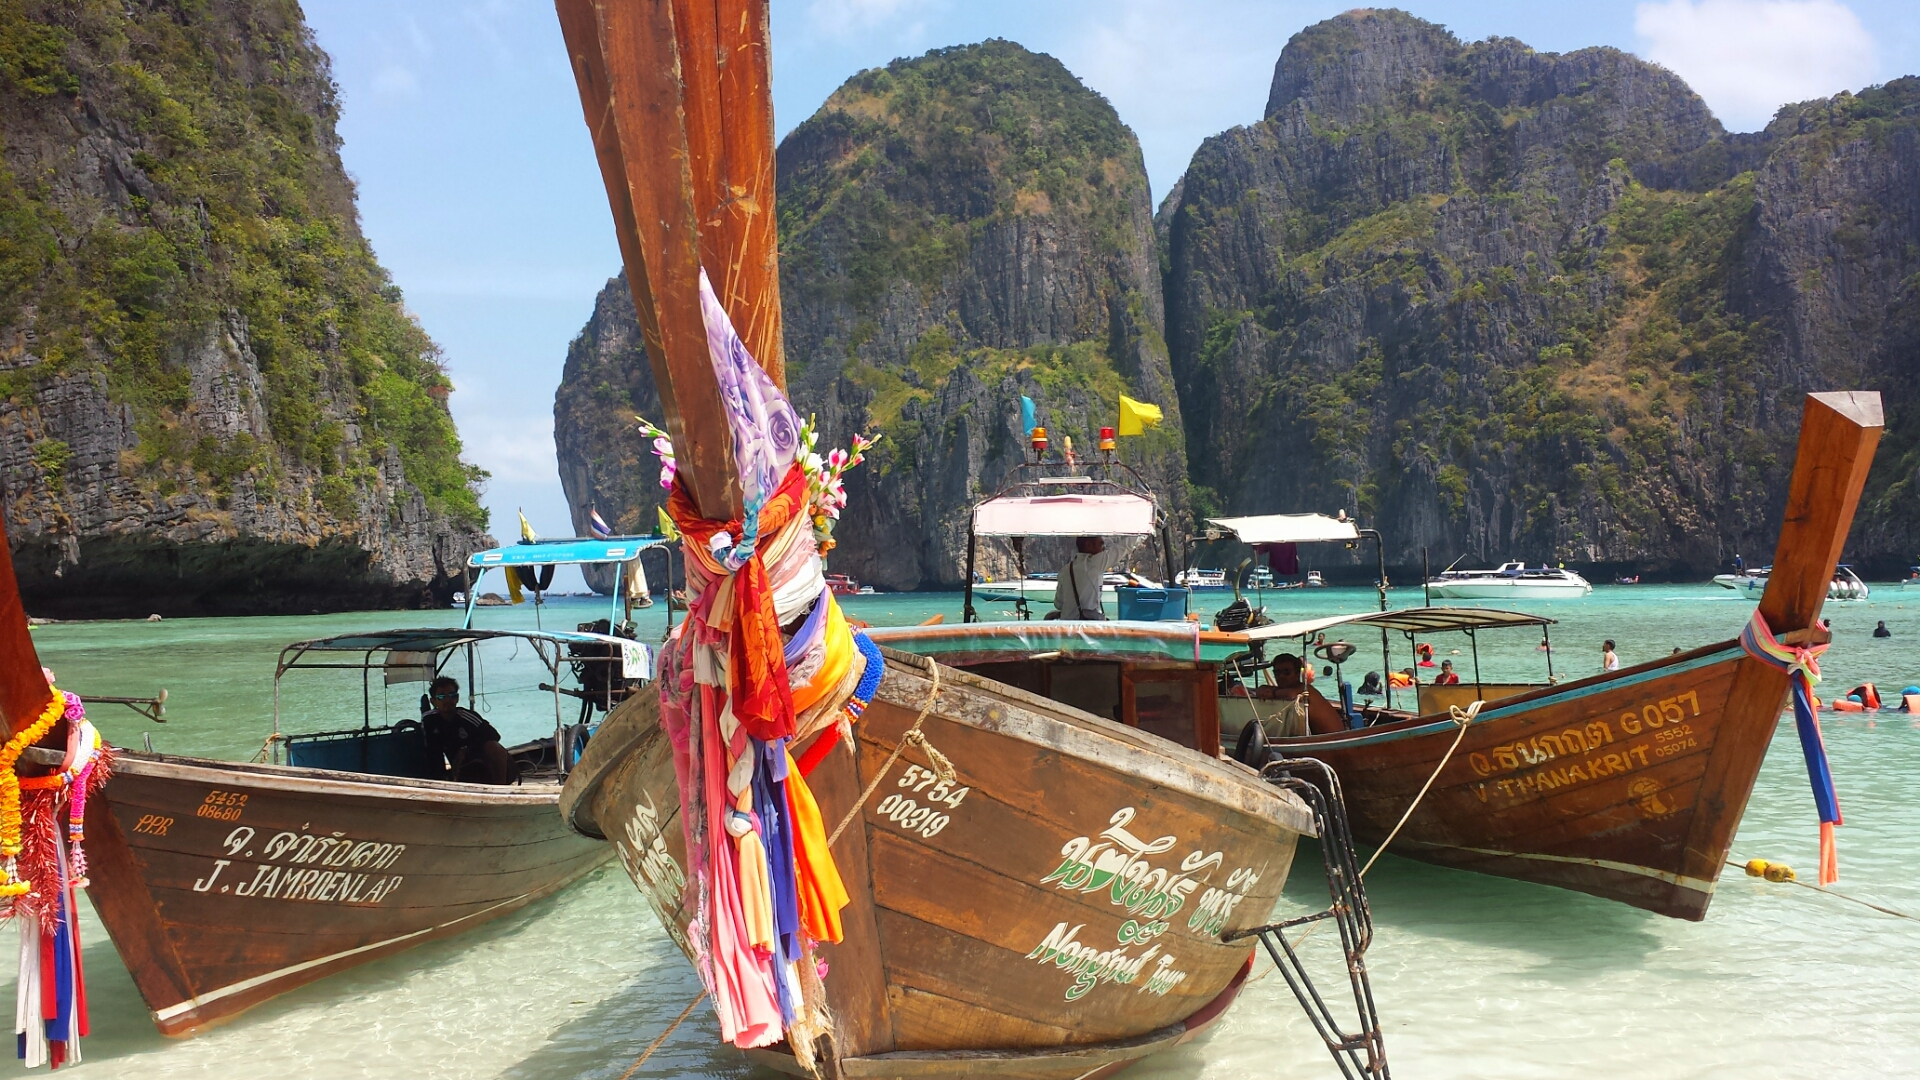 12 Reasons Why You Must Visit Thailand